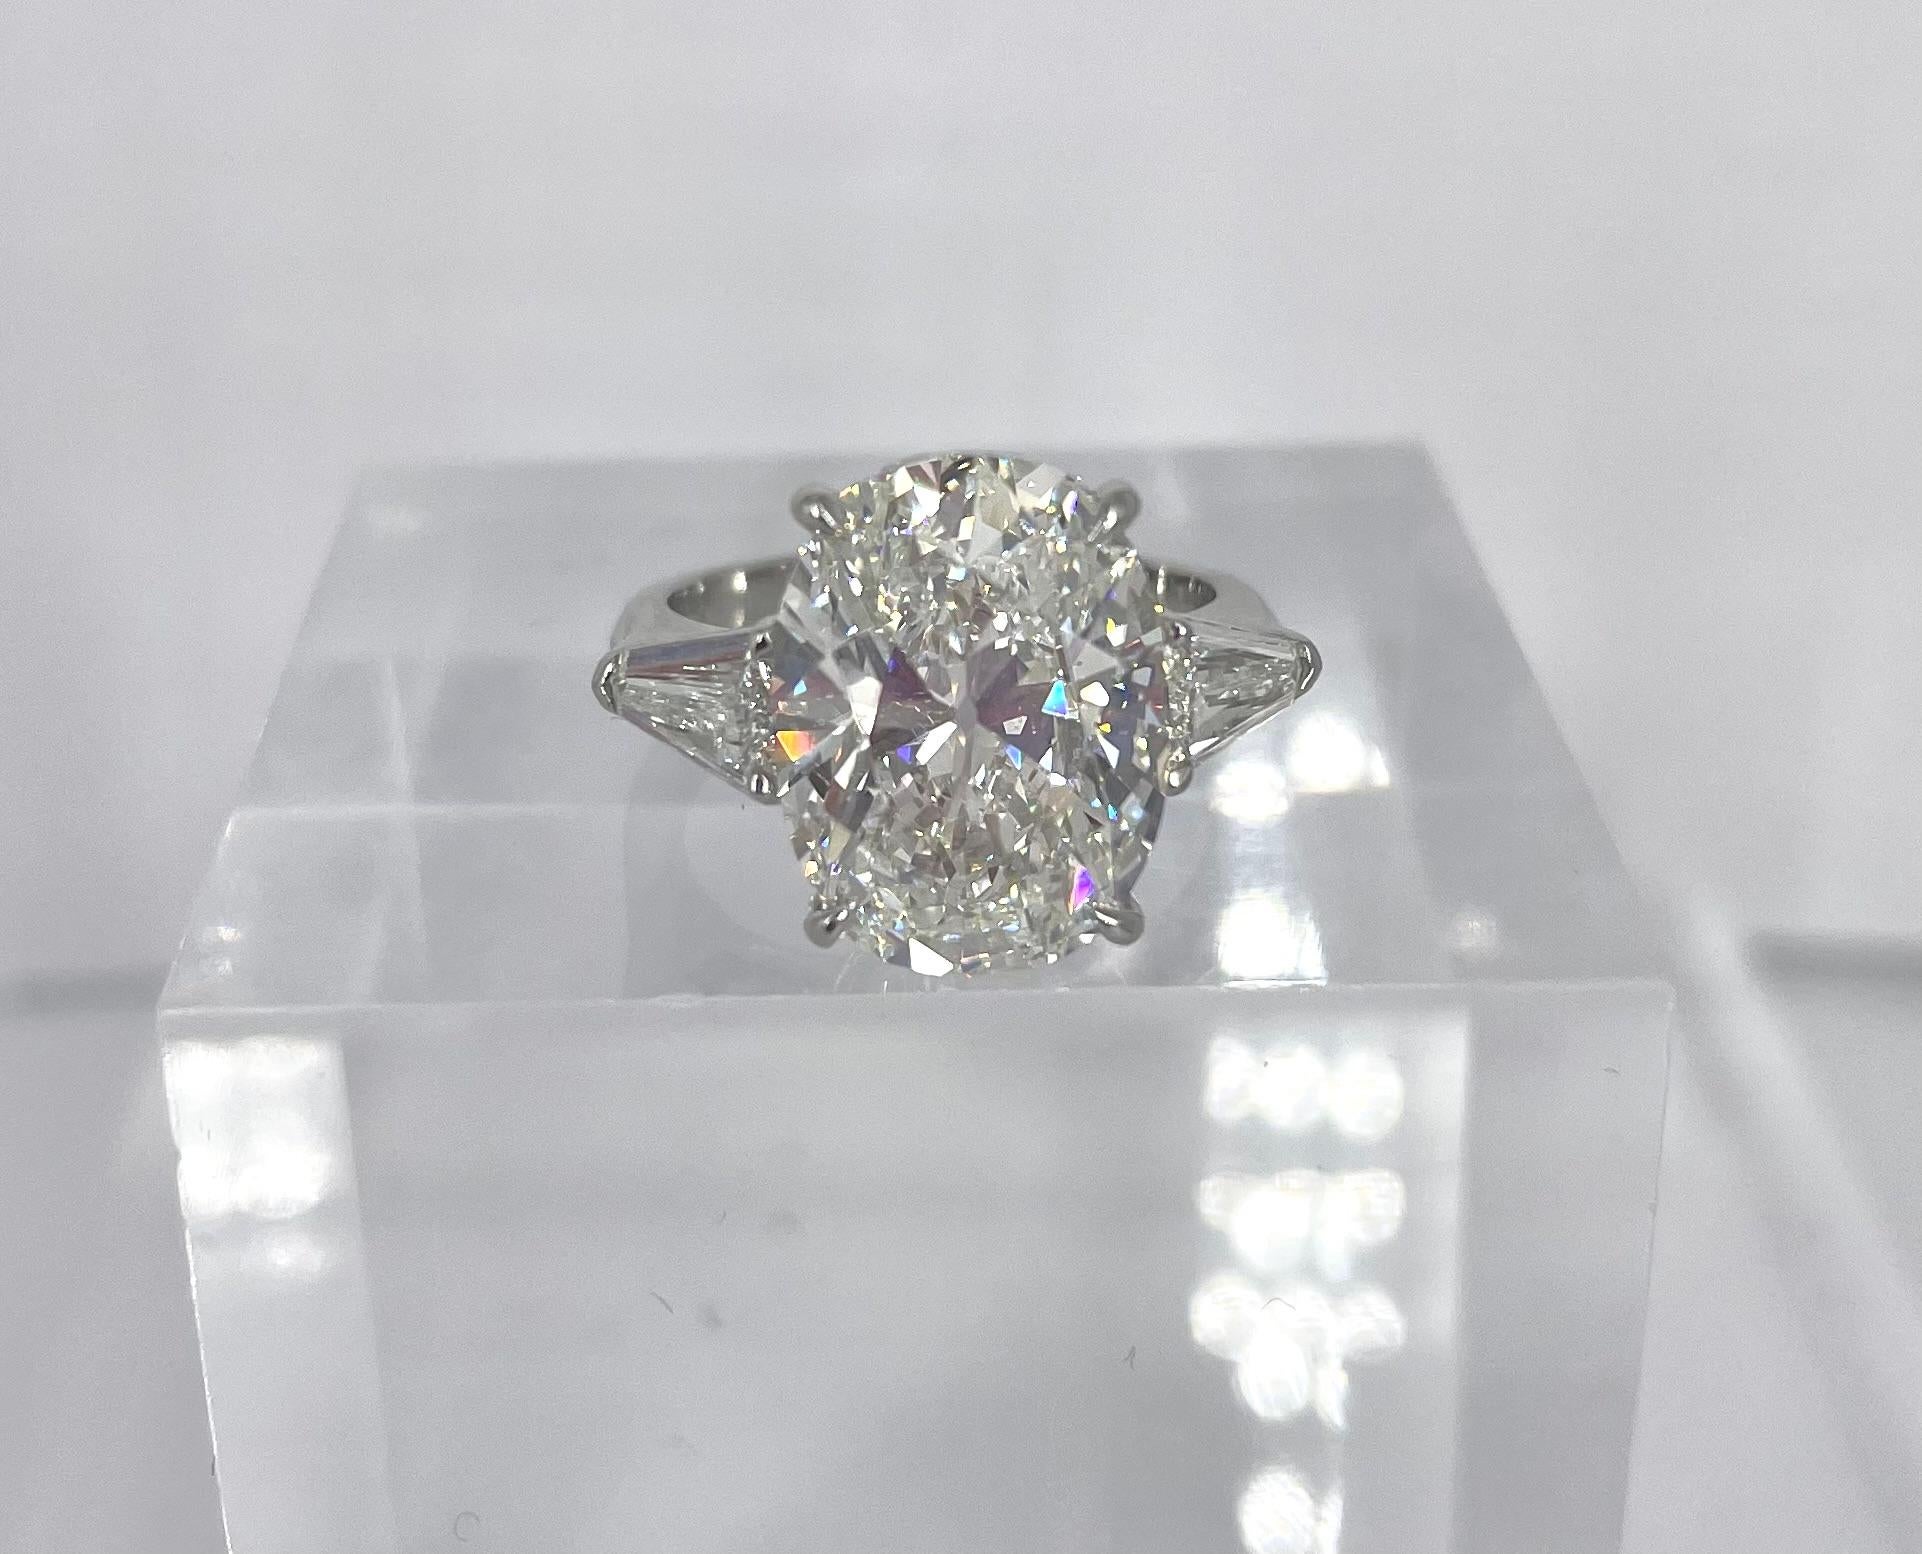 This gorgeous engagement ring showcases a magnificent 7.03 carat cushion diamond, certified by the GIA to be G color and VS1 clarity. This is an exceptional stone because it is unusually elongated and curved, giving the flattering length of an oval